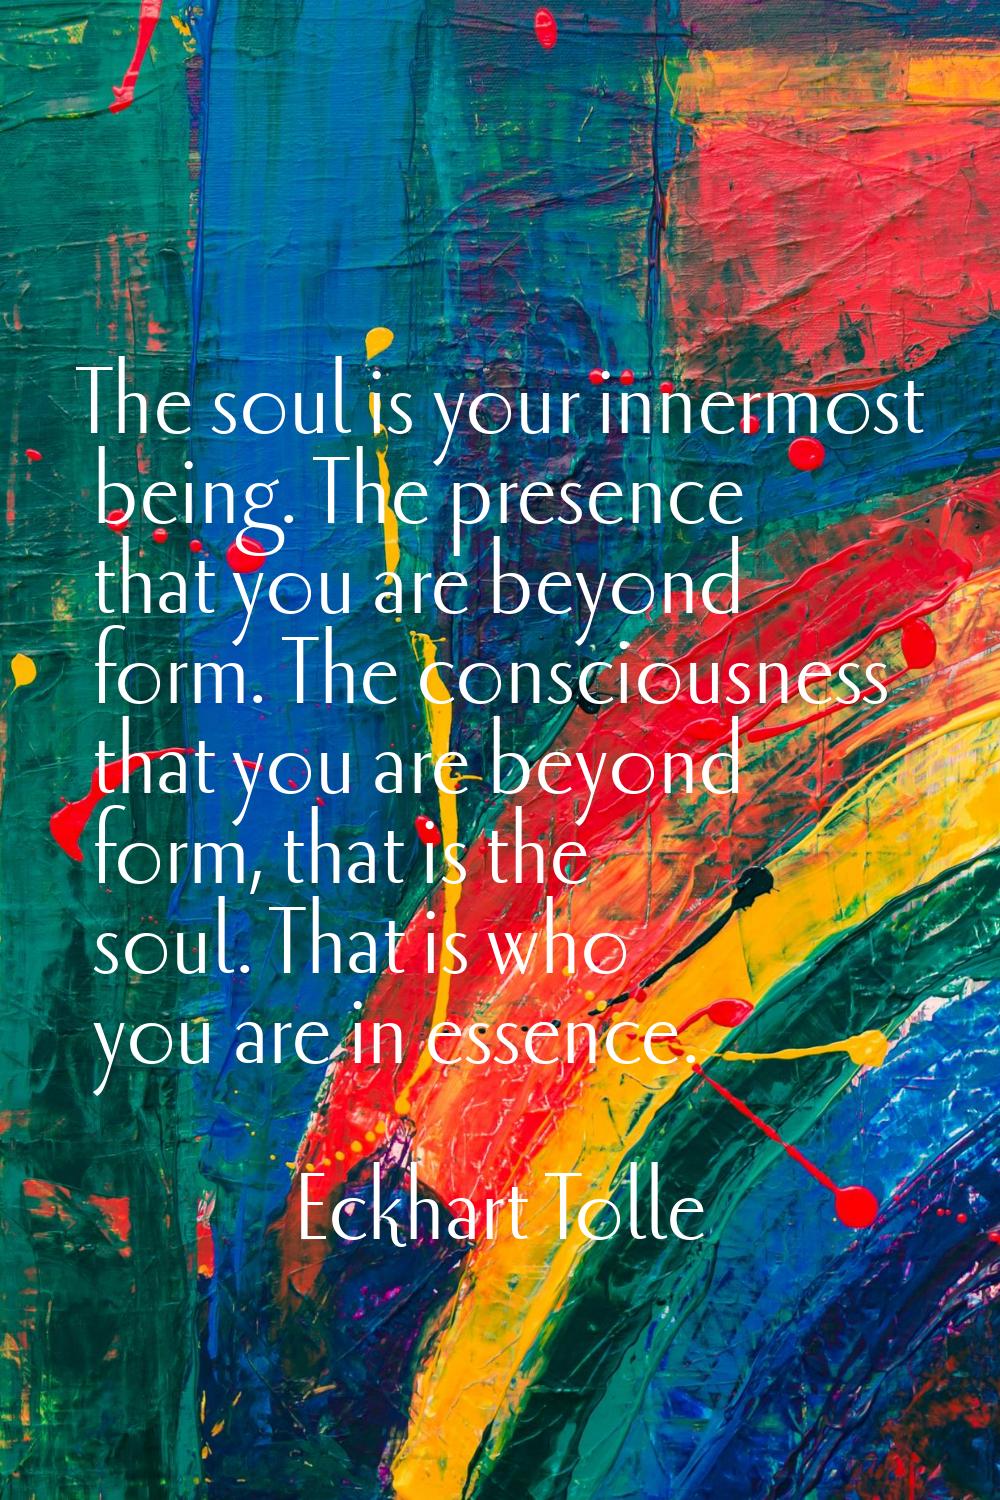 The soul is your innermost being. The presence that you are beyond form. The consciousness that you